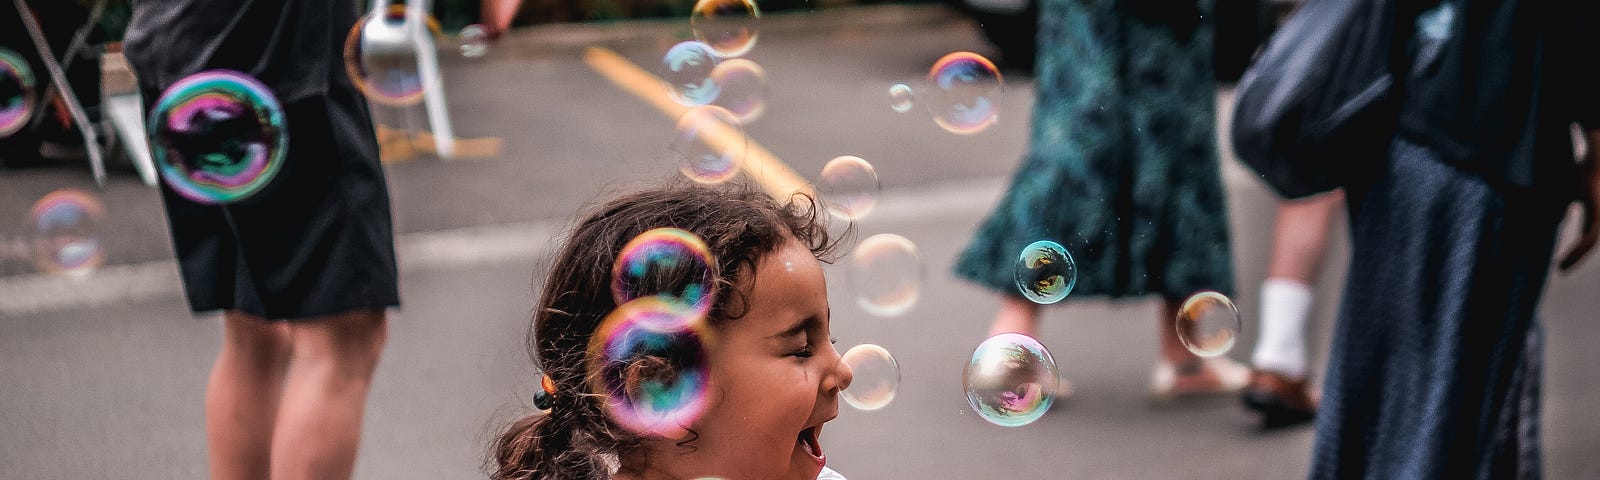 A laughing child on a sidewalk, with soap bubbles around her